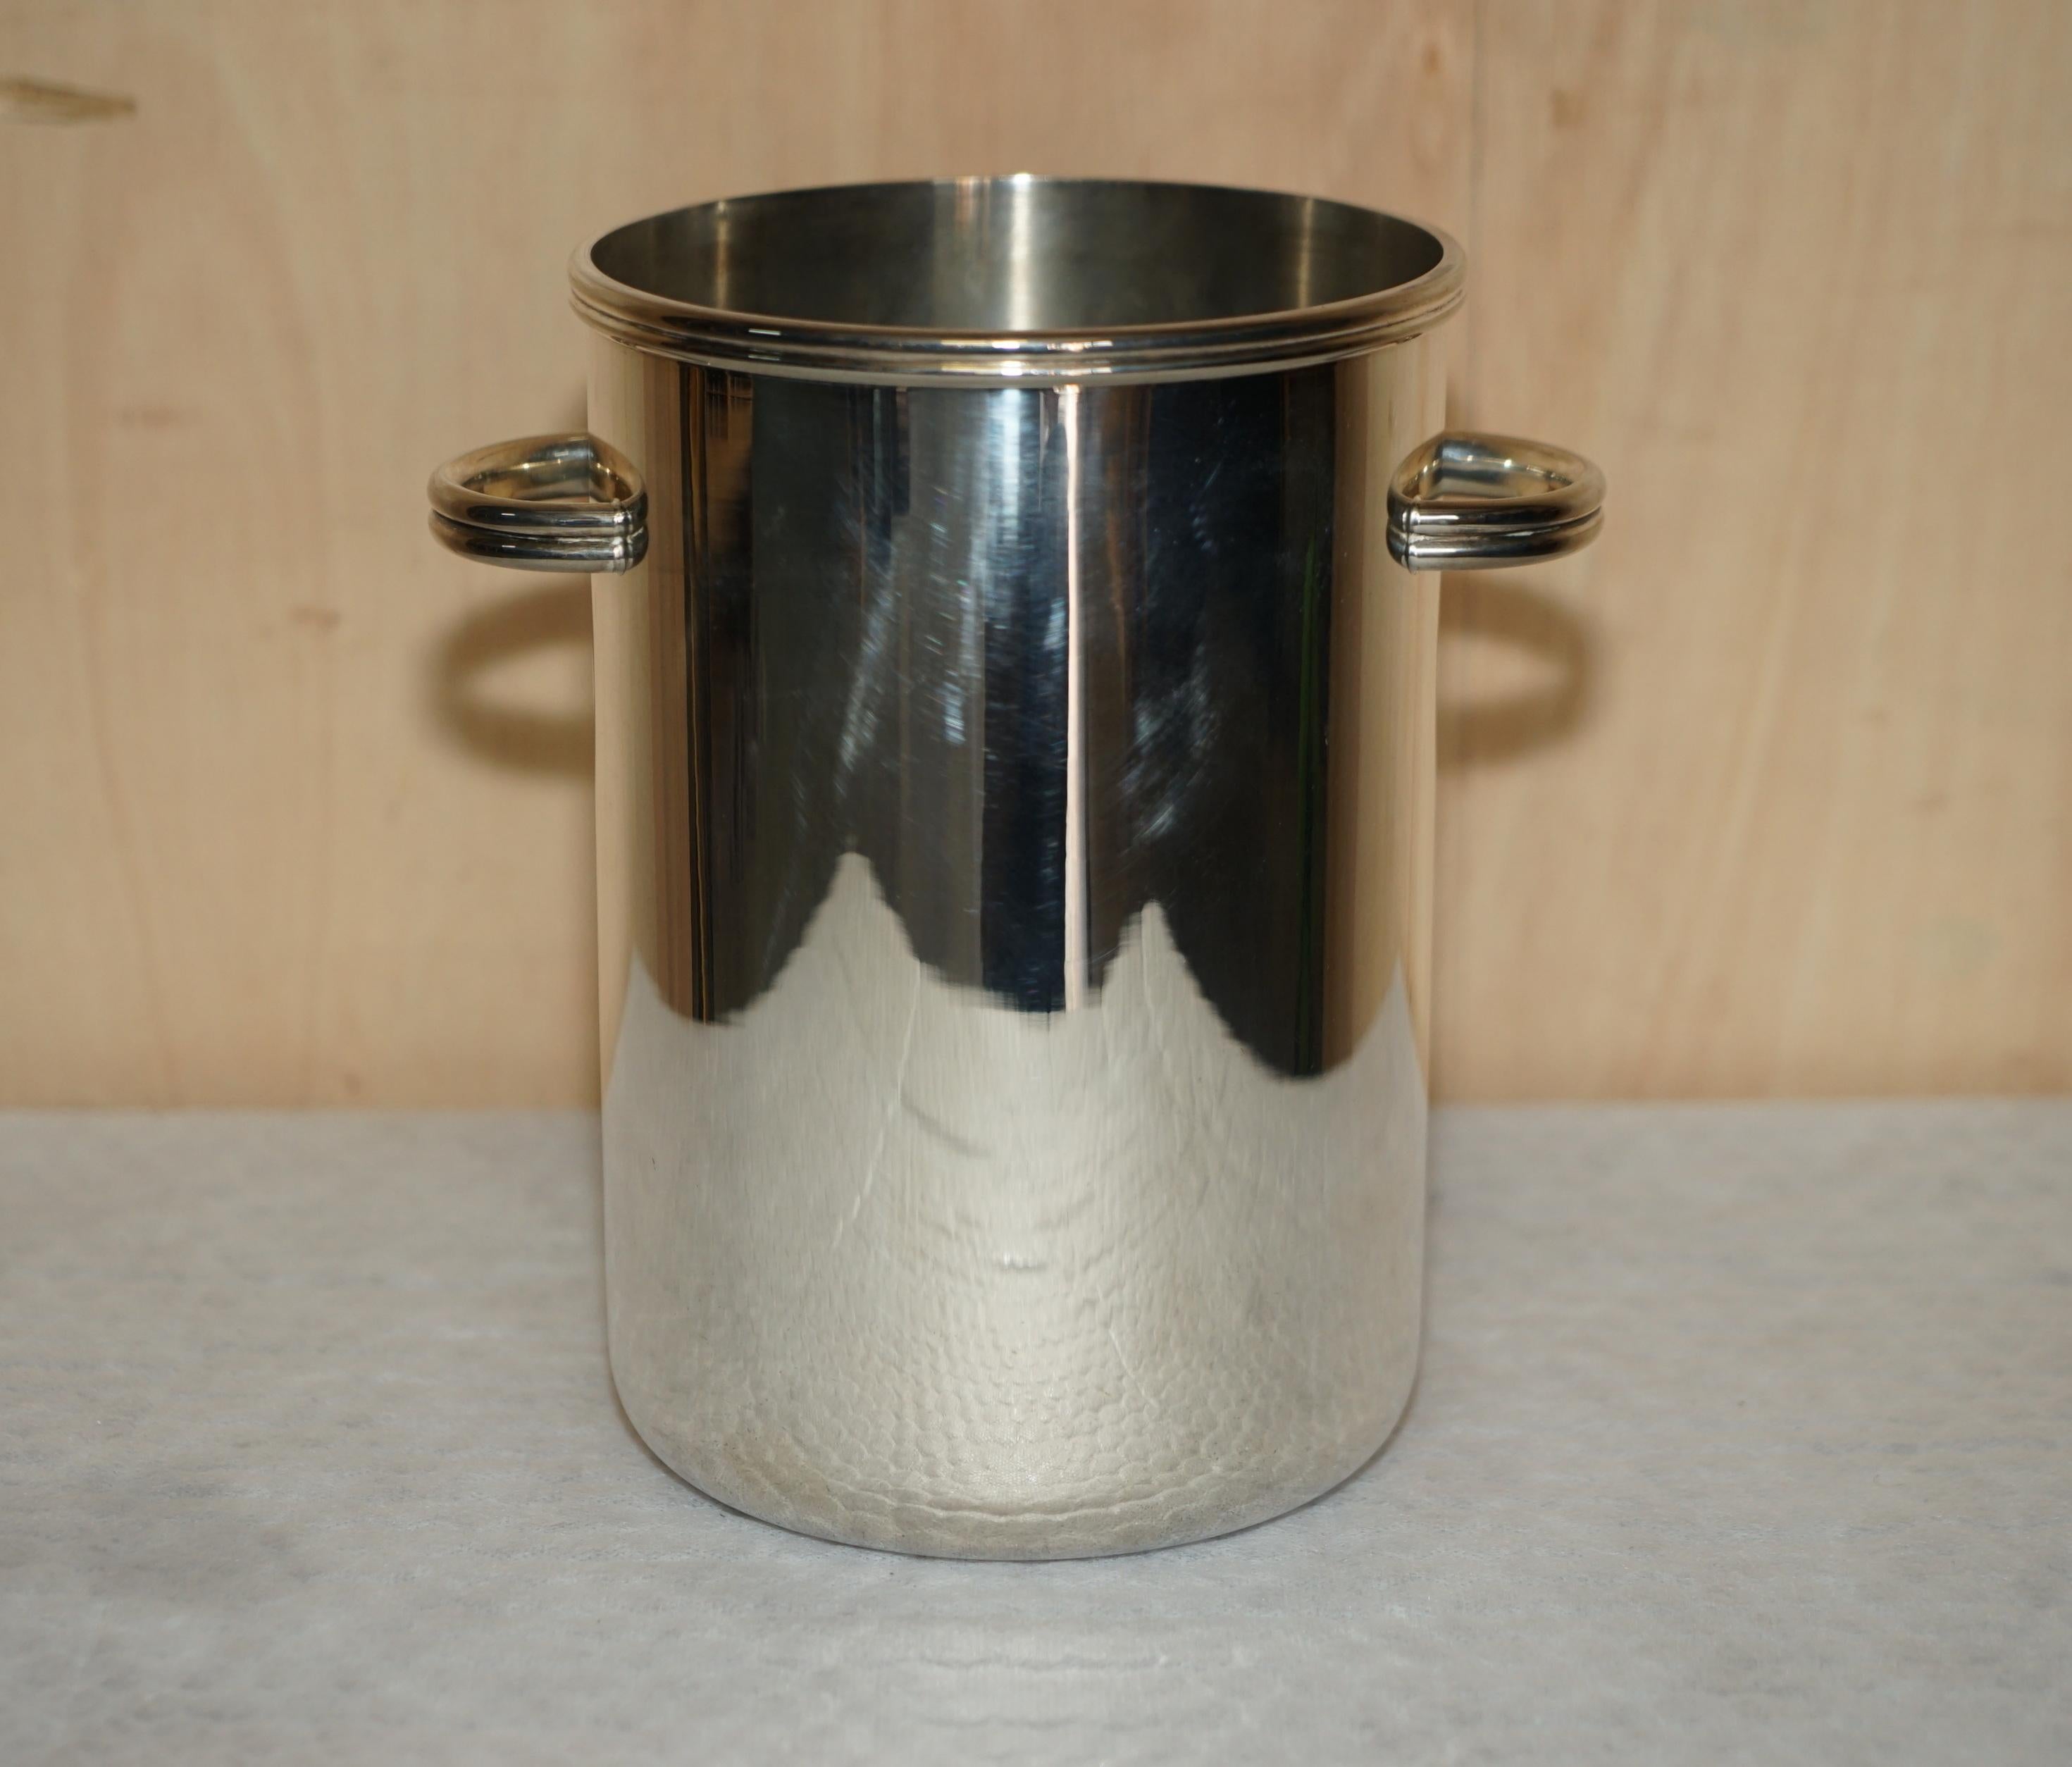 We are delighted to offer for sale this stunning original fully hallmarked Saint Helaire Paris Champaign or ice bucket
A stunning piece, circa 1930’s so right in the swinging Art Deco era

It is in wonderful condition with the original hallmark to